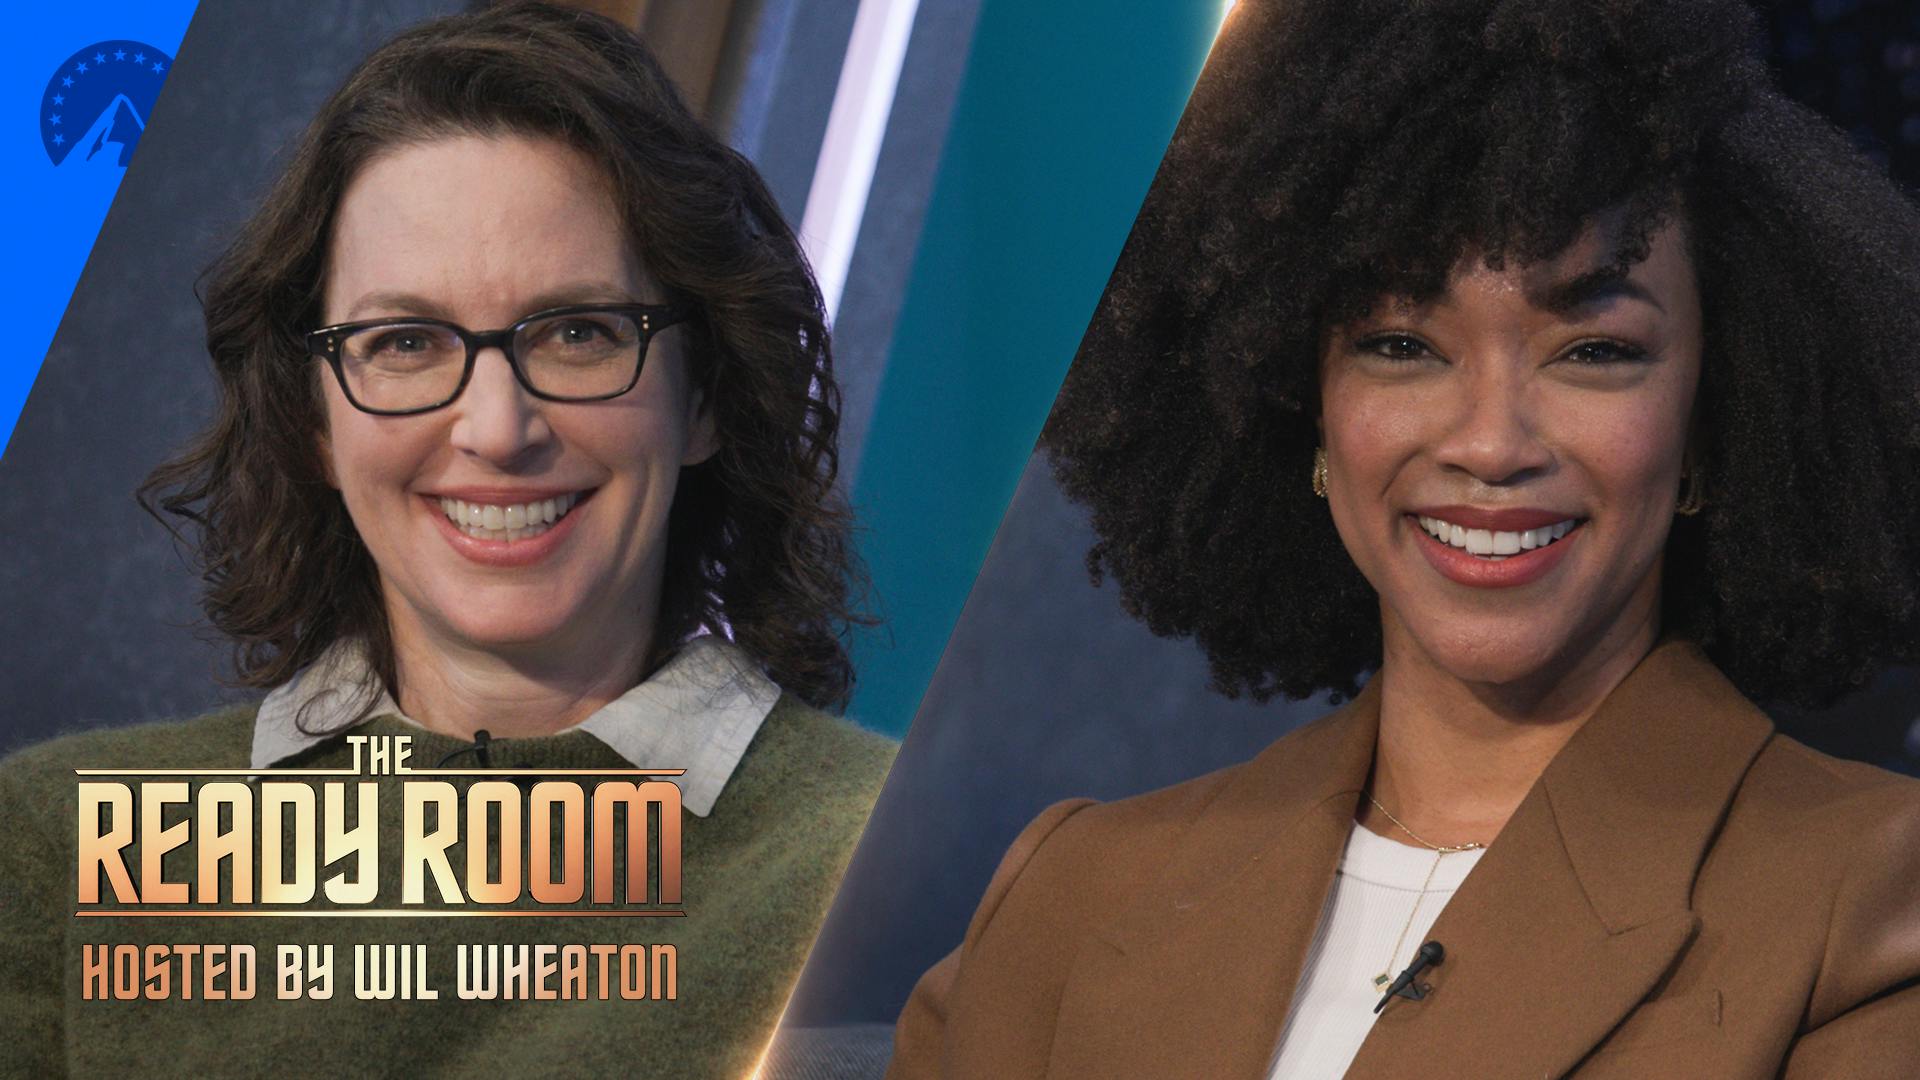 Michelle Paradise and Sonequa Martin-Green head to The Ready Room